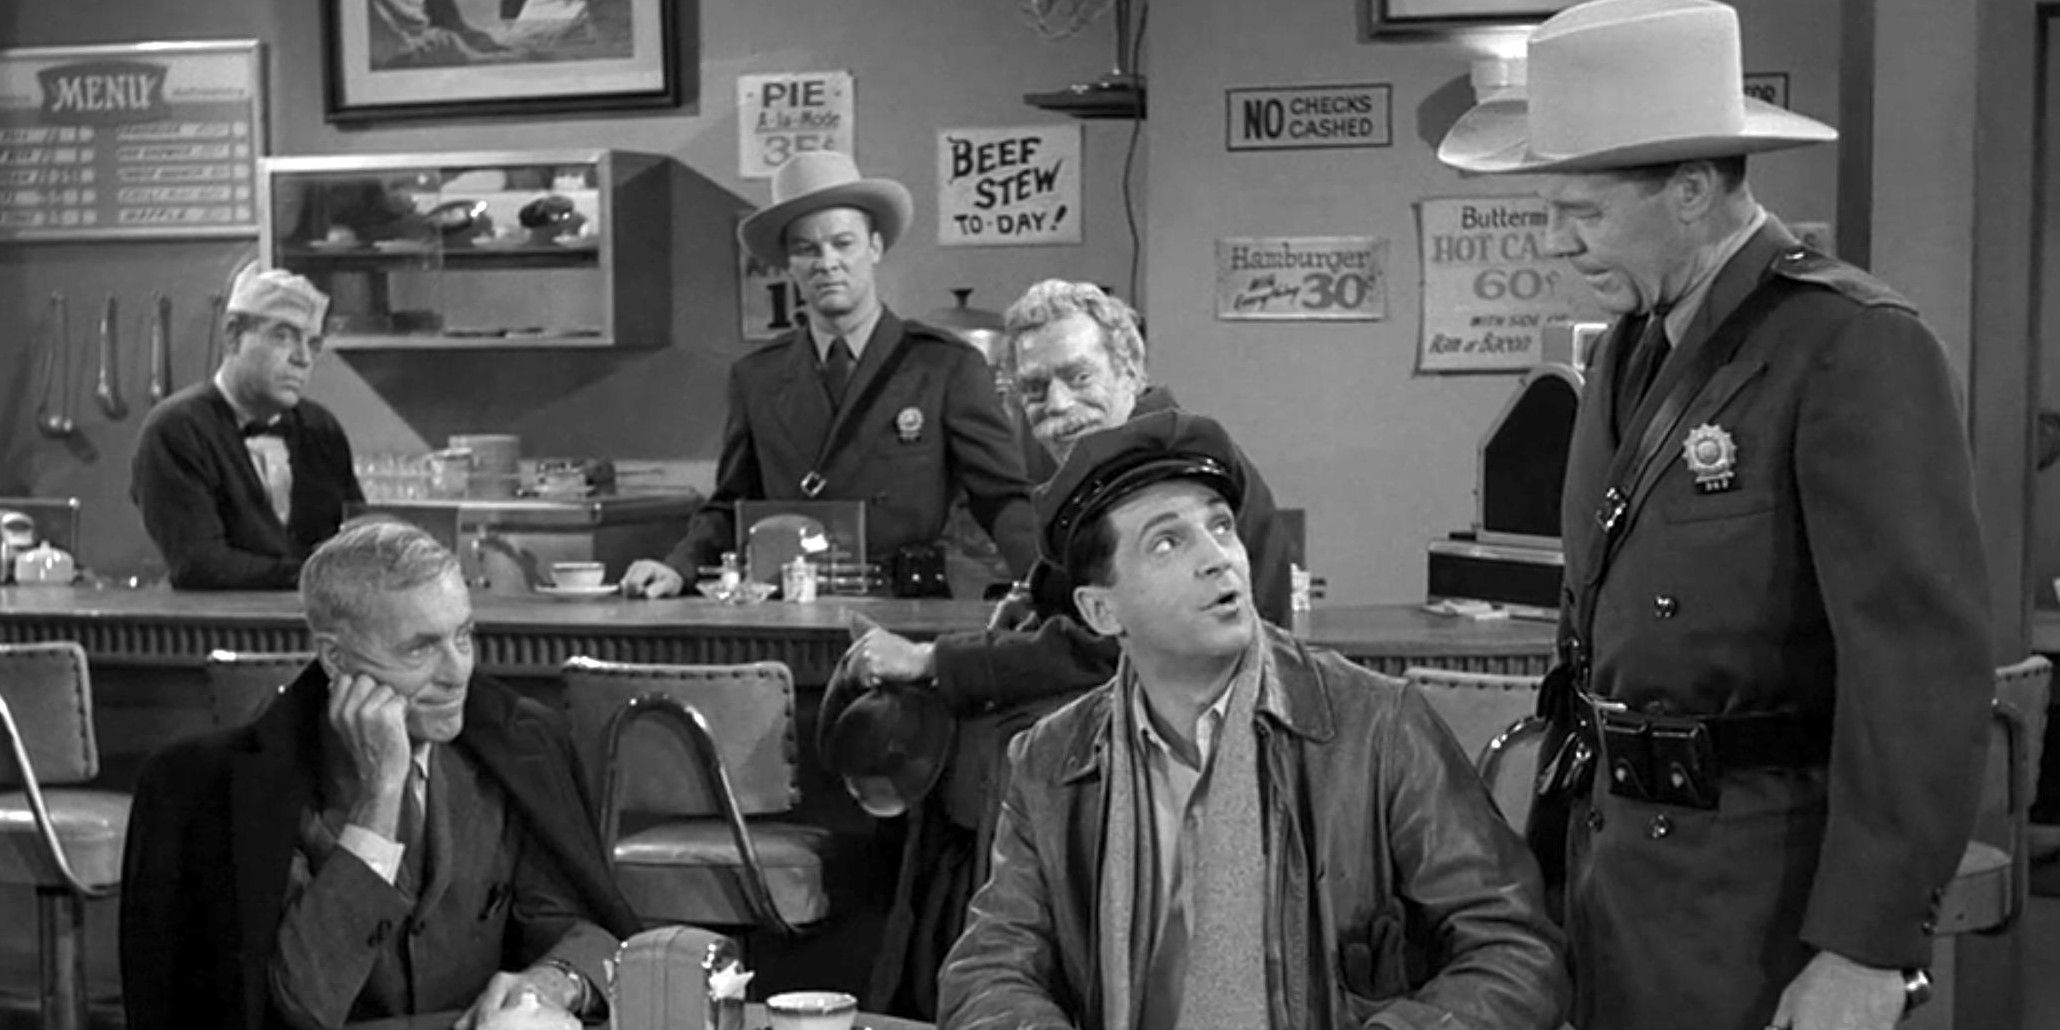 Black and white image of a cop and people in a diner in The Twilight Zone